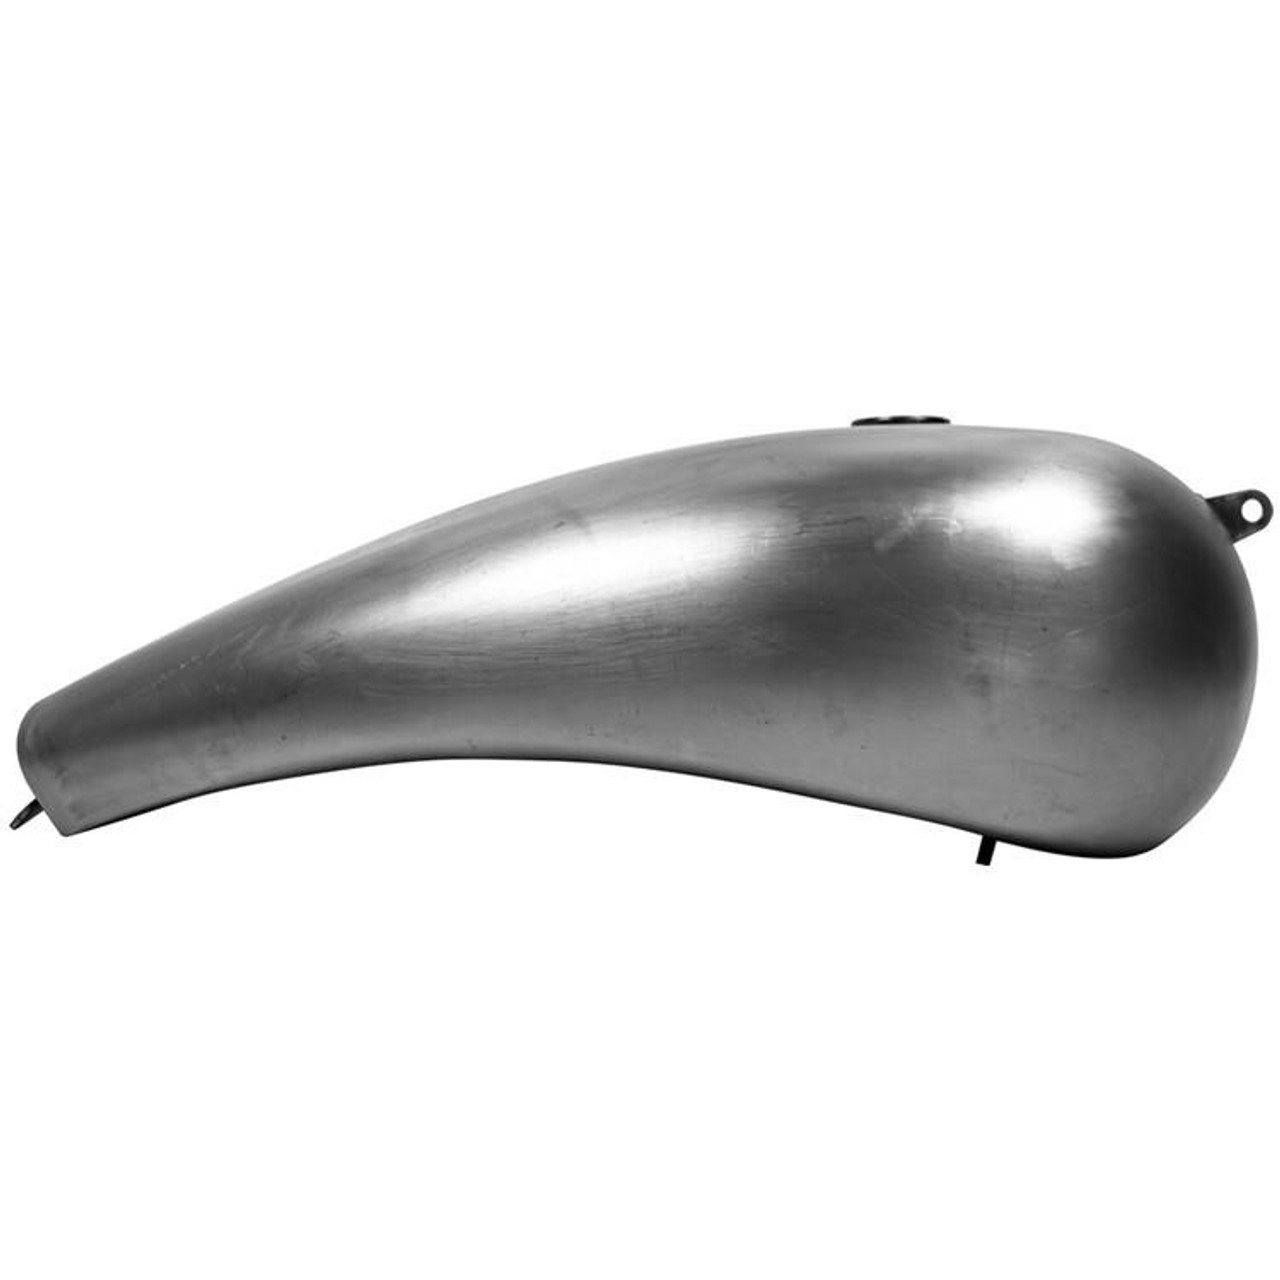 https://cdn11.bigcommerce.com/s-zsz1m/images/stencil/1280x1280/products/12113/73238/kodlin-3.5-gallon-stretched-gas-tank-fits-m8-softail-models__94650.1690492178.jpg?c=2